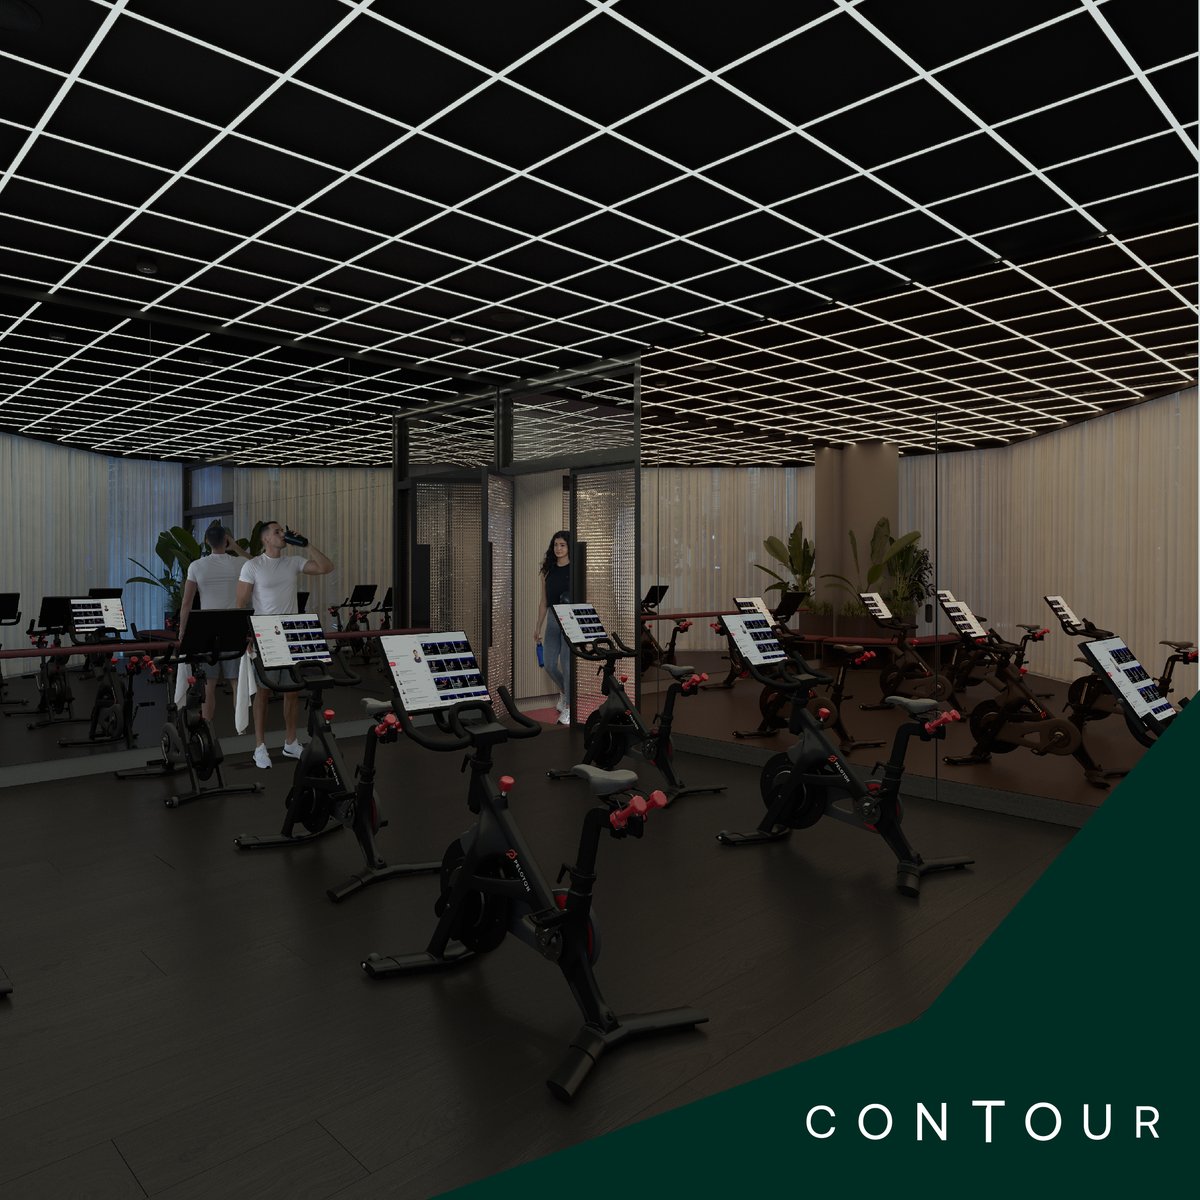 We know that health is essential for happiness. Our Contour residents will be able to let off steam whenever they want to at The Club and Peloton Spin Studio. contournewjackson.com Contour, Part of @NewJacksonMCR, planned for completion in Q1/Q2 2027. #Contour #NewJackson…